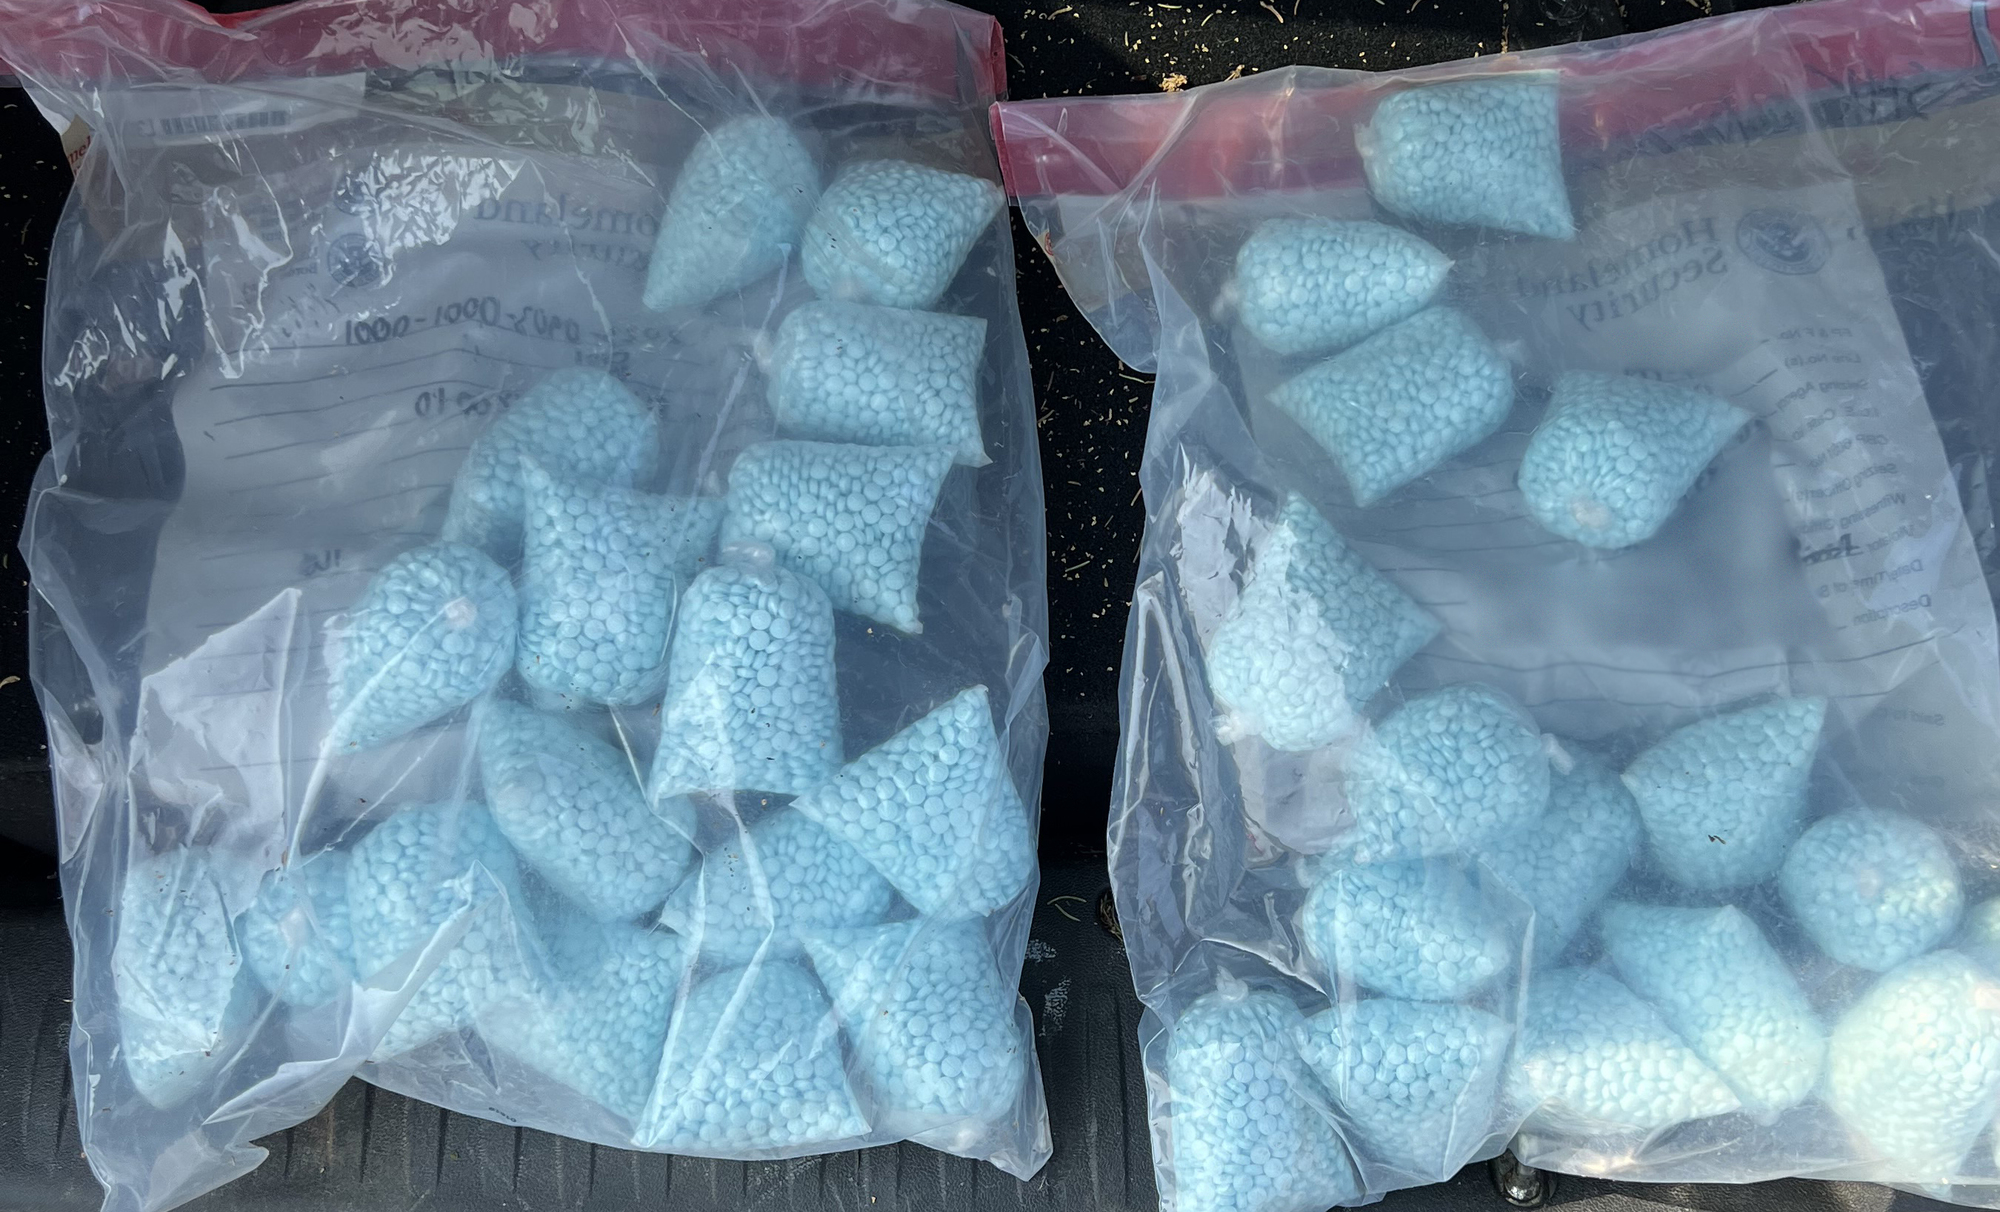 OCTF Operation Clean Sweep drugs seized